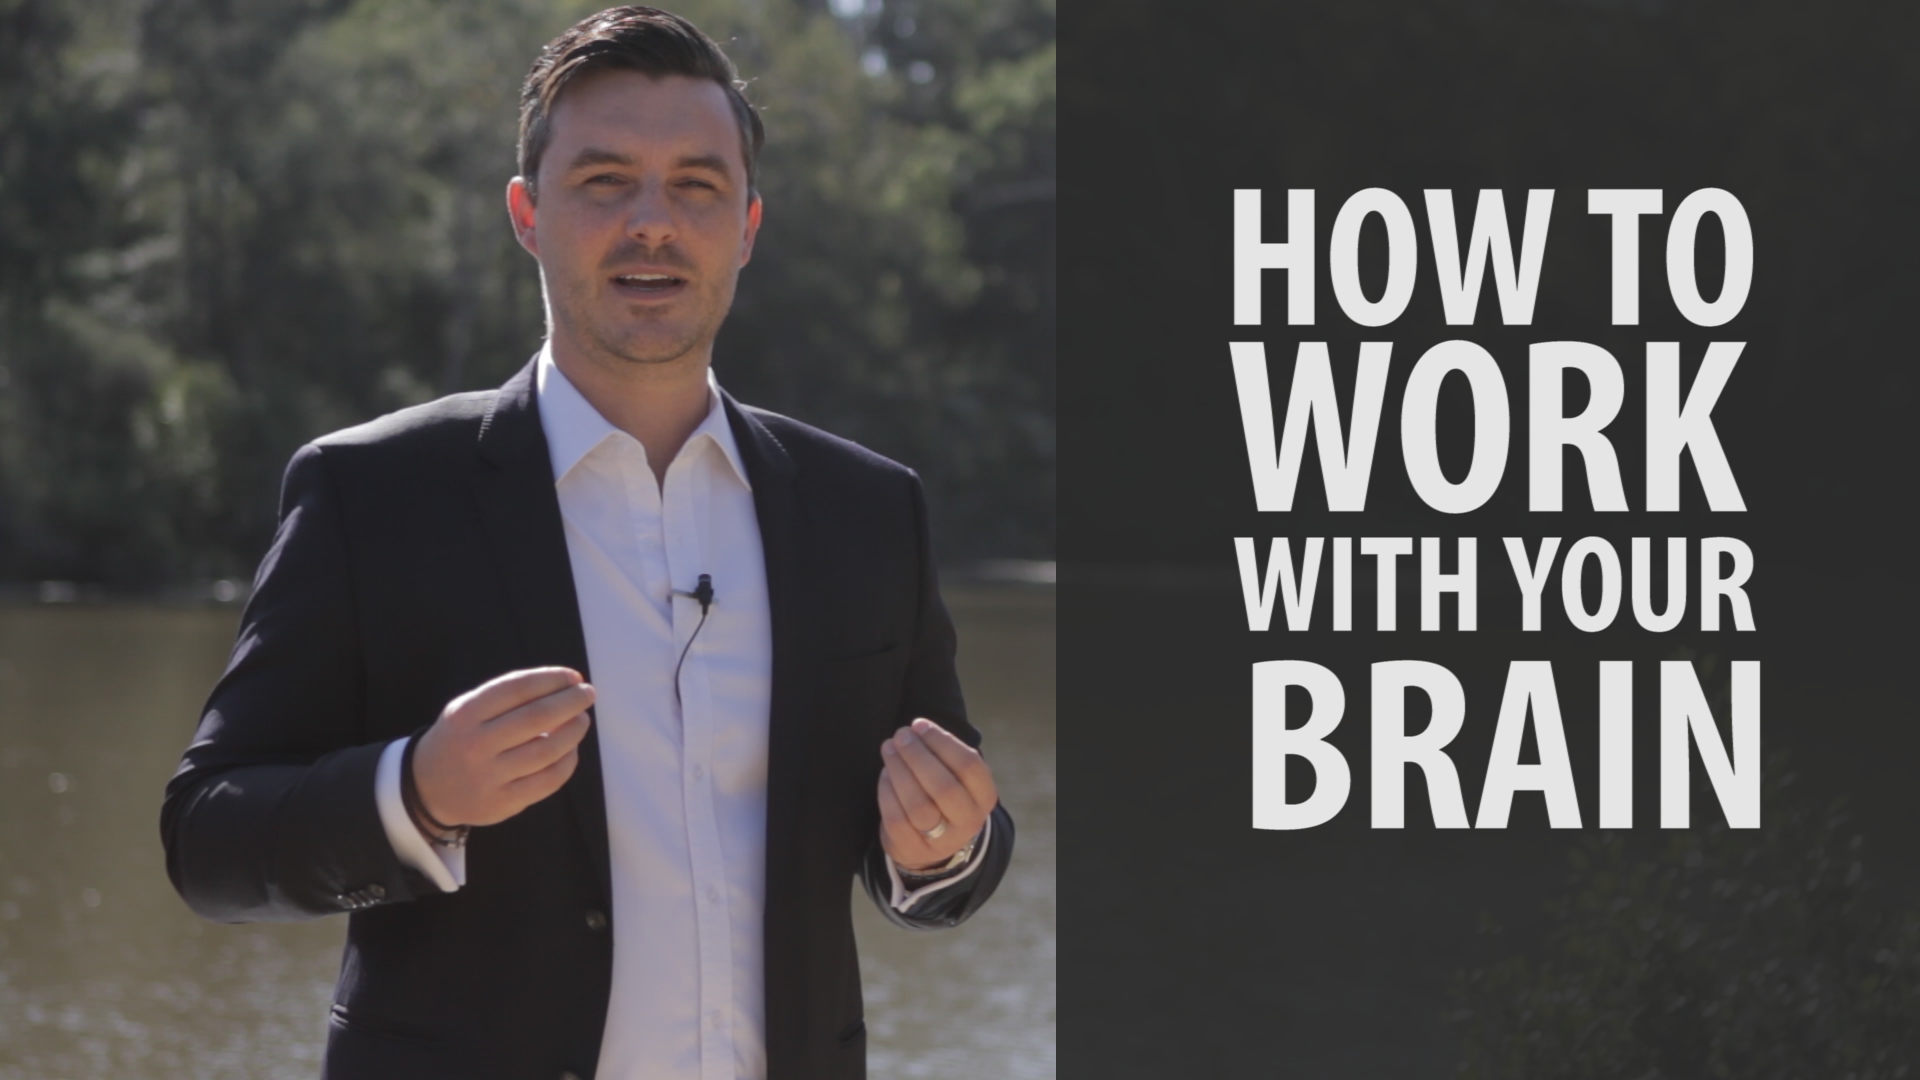 HOW TO WORK WITH YOUR BRAIN